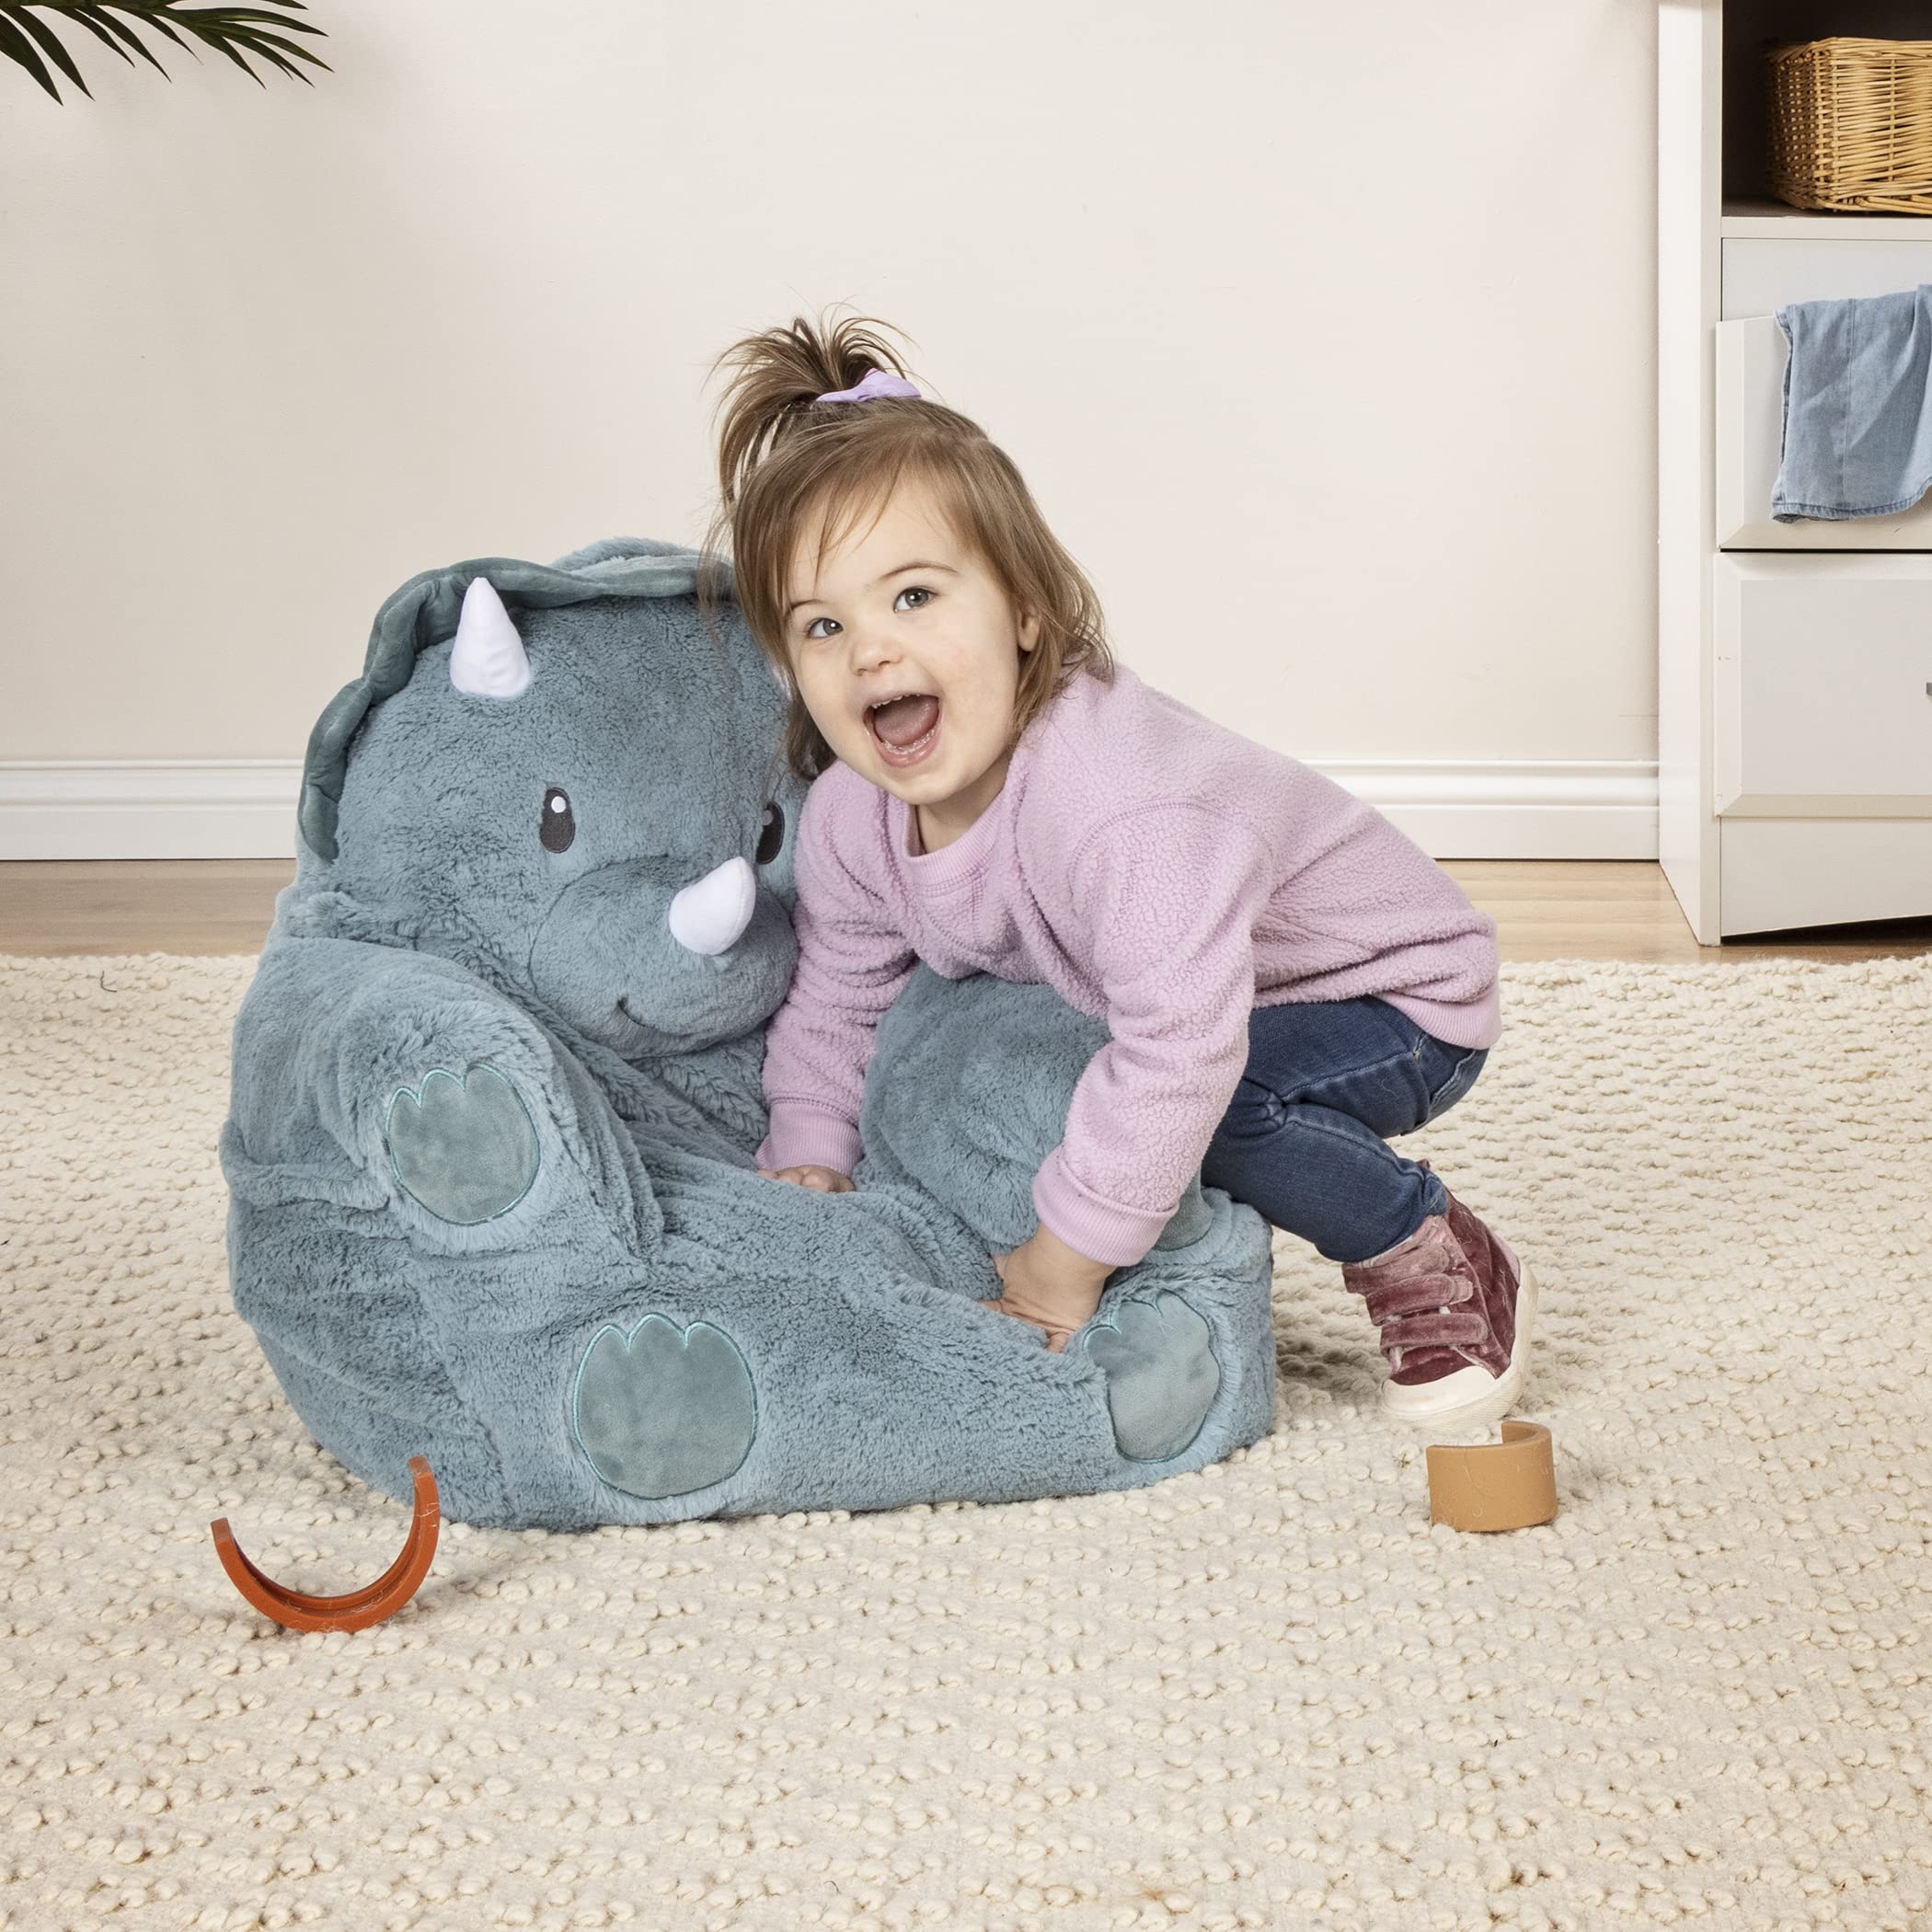 Cuddo Buddy Character Chair for Toddlers 12-36 months – Dinosaur, Plush